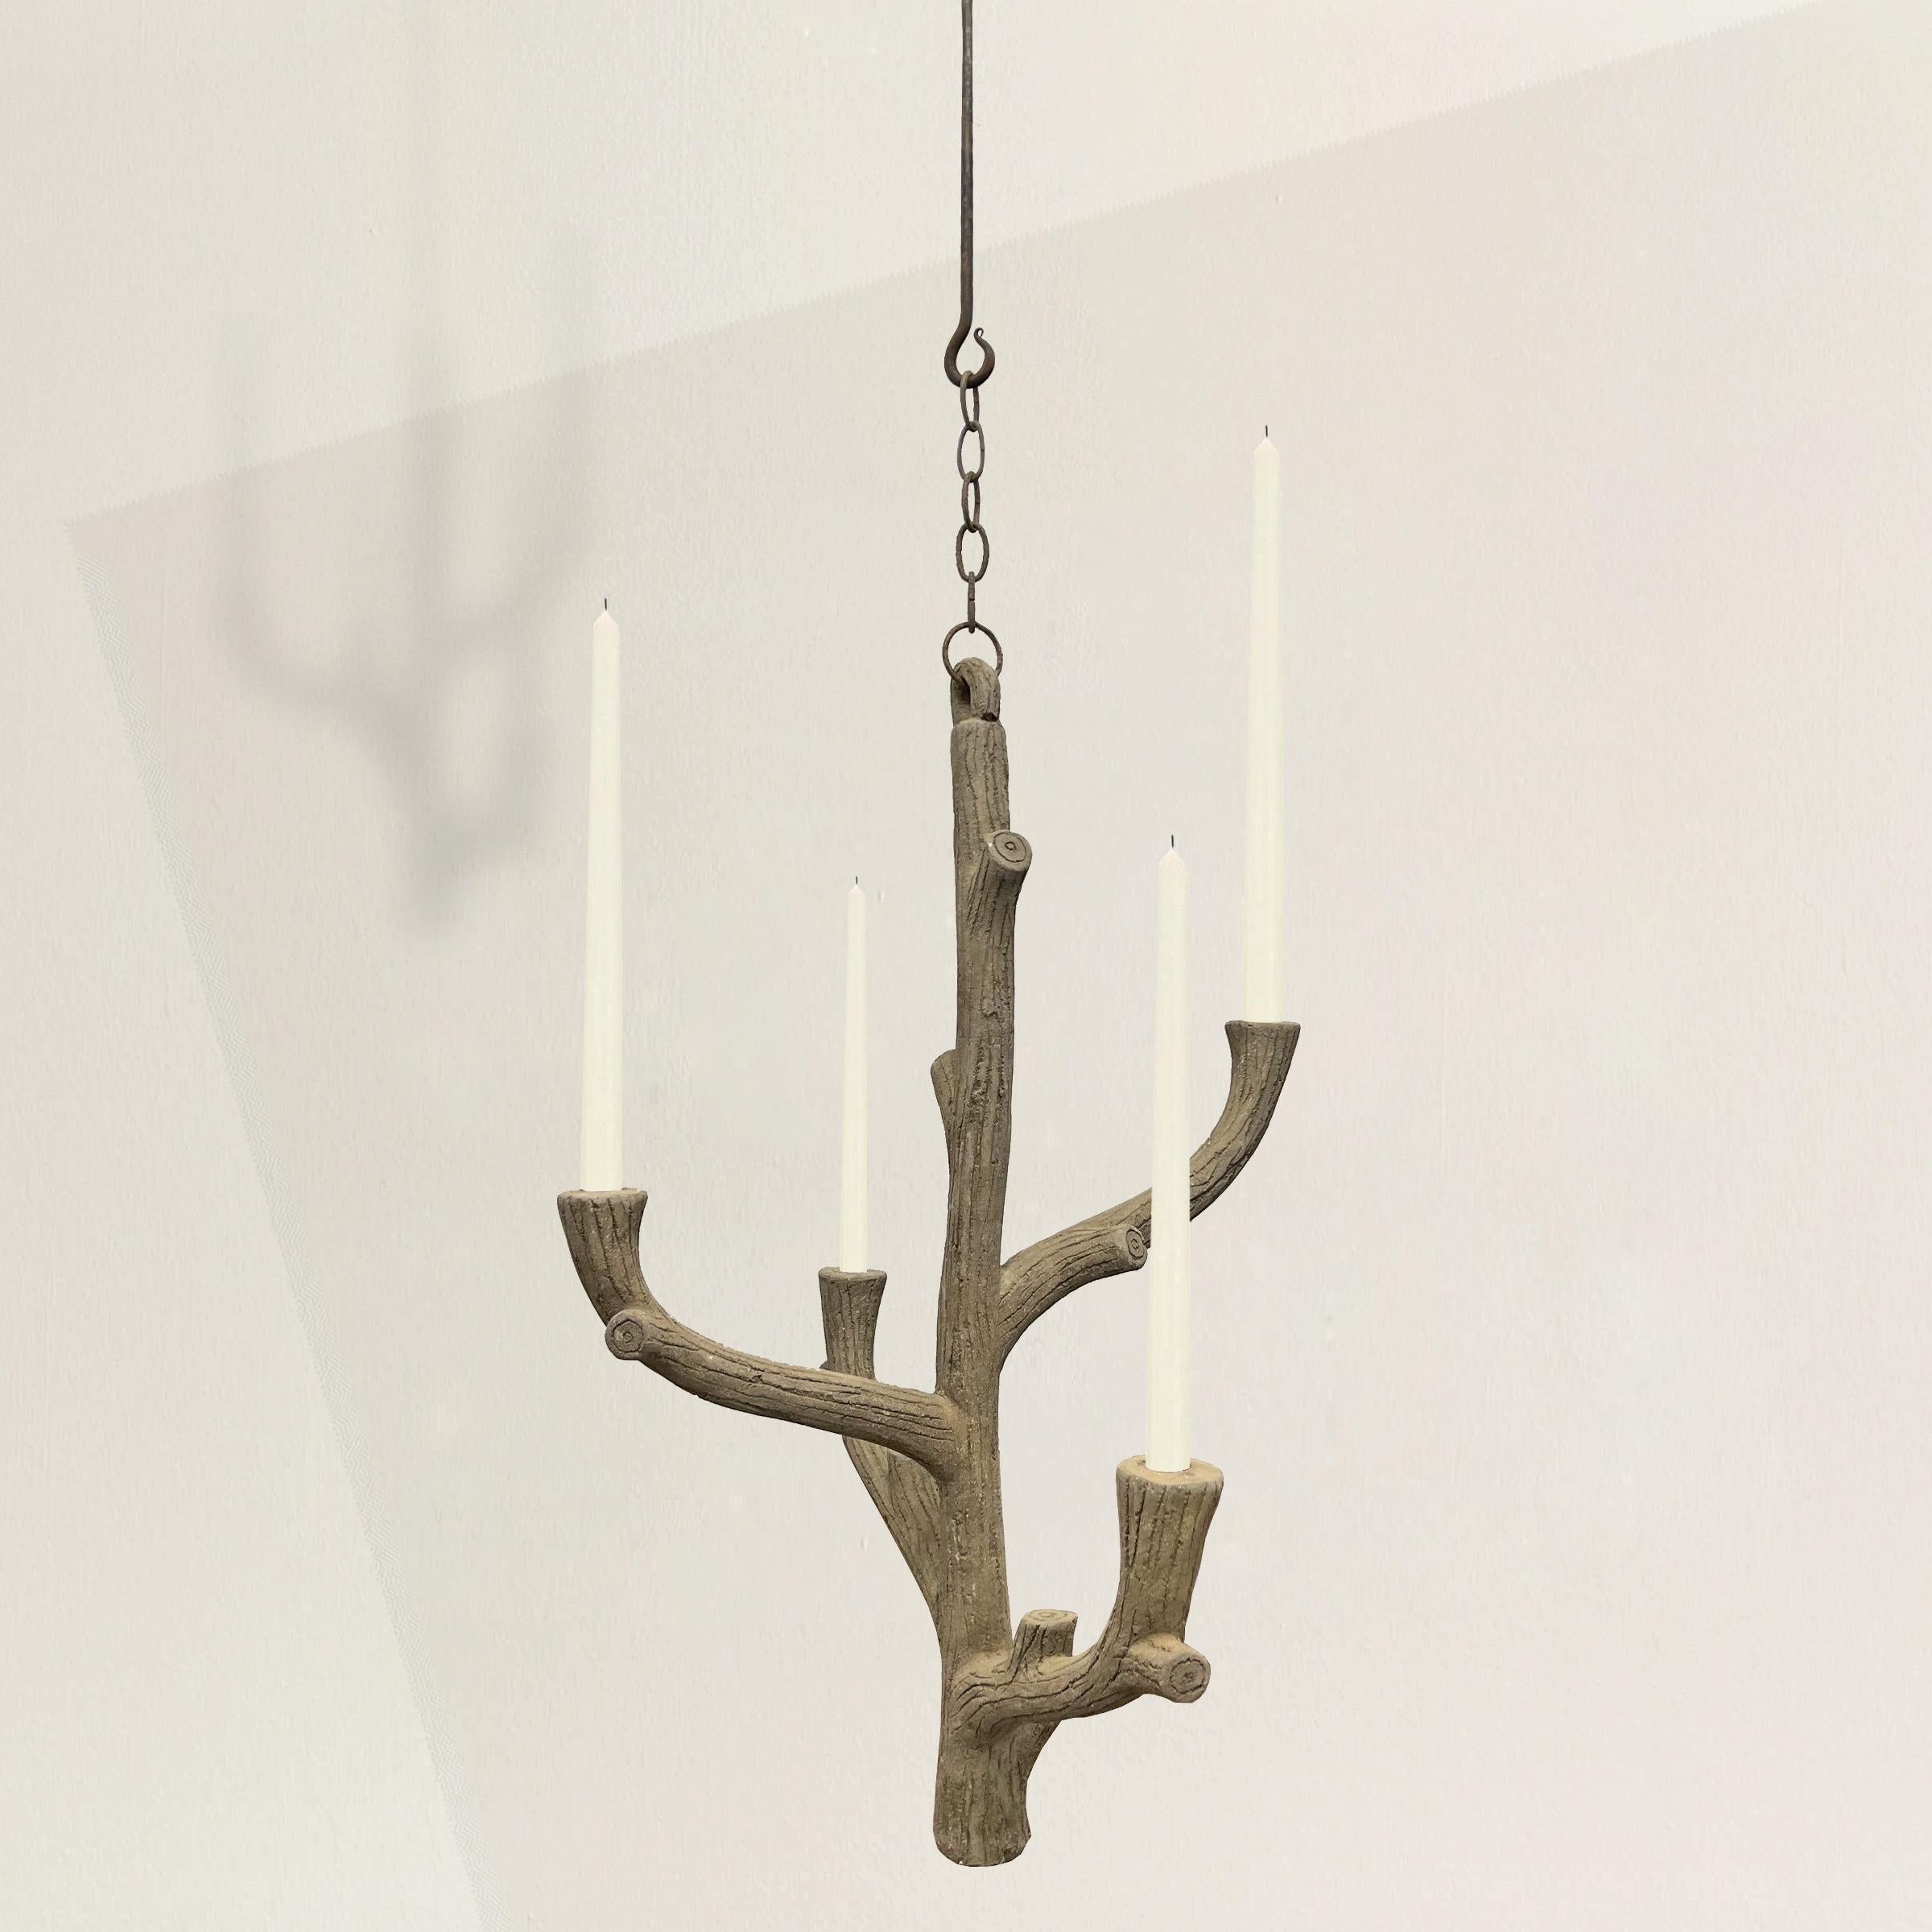 Behold this 20th-century French Faux Bois chandelier, a testament to the enduring charm of the Faux Bois movement. Crafted from cement, its four arms, artfully carved to mimic tree branches at varying heights, encapsulate the movement's dedication